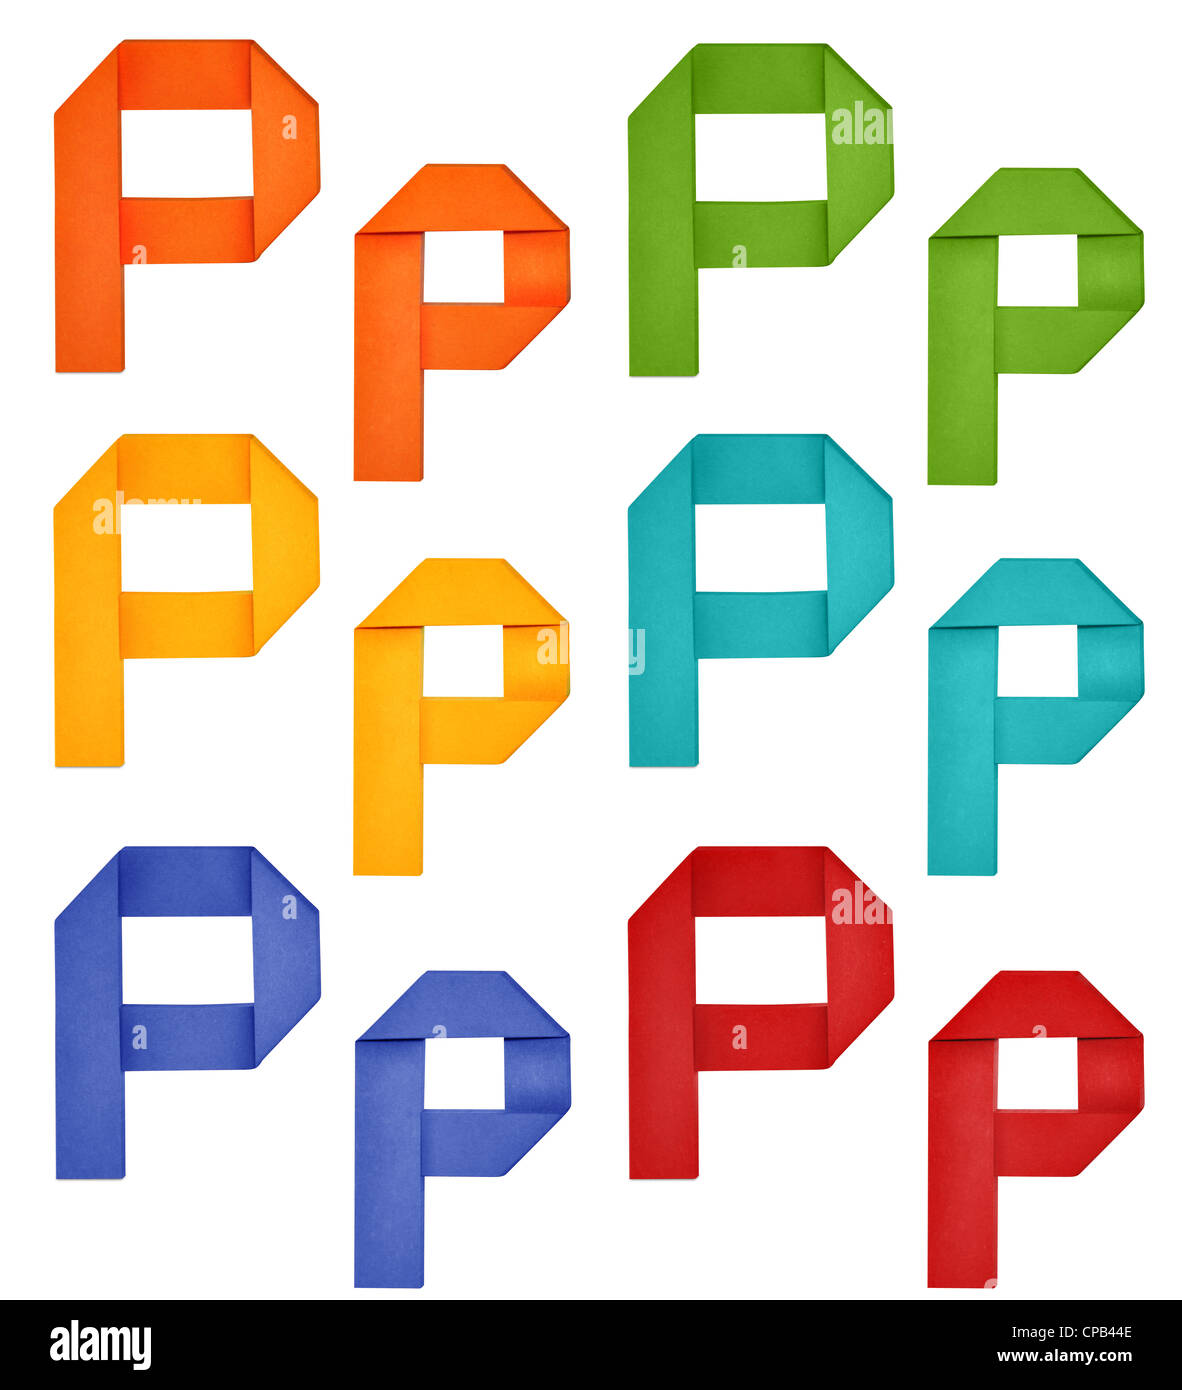 Letter P Lowercase Stock Photos Letter P Lowercase Stock